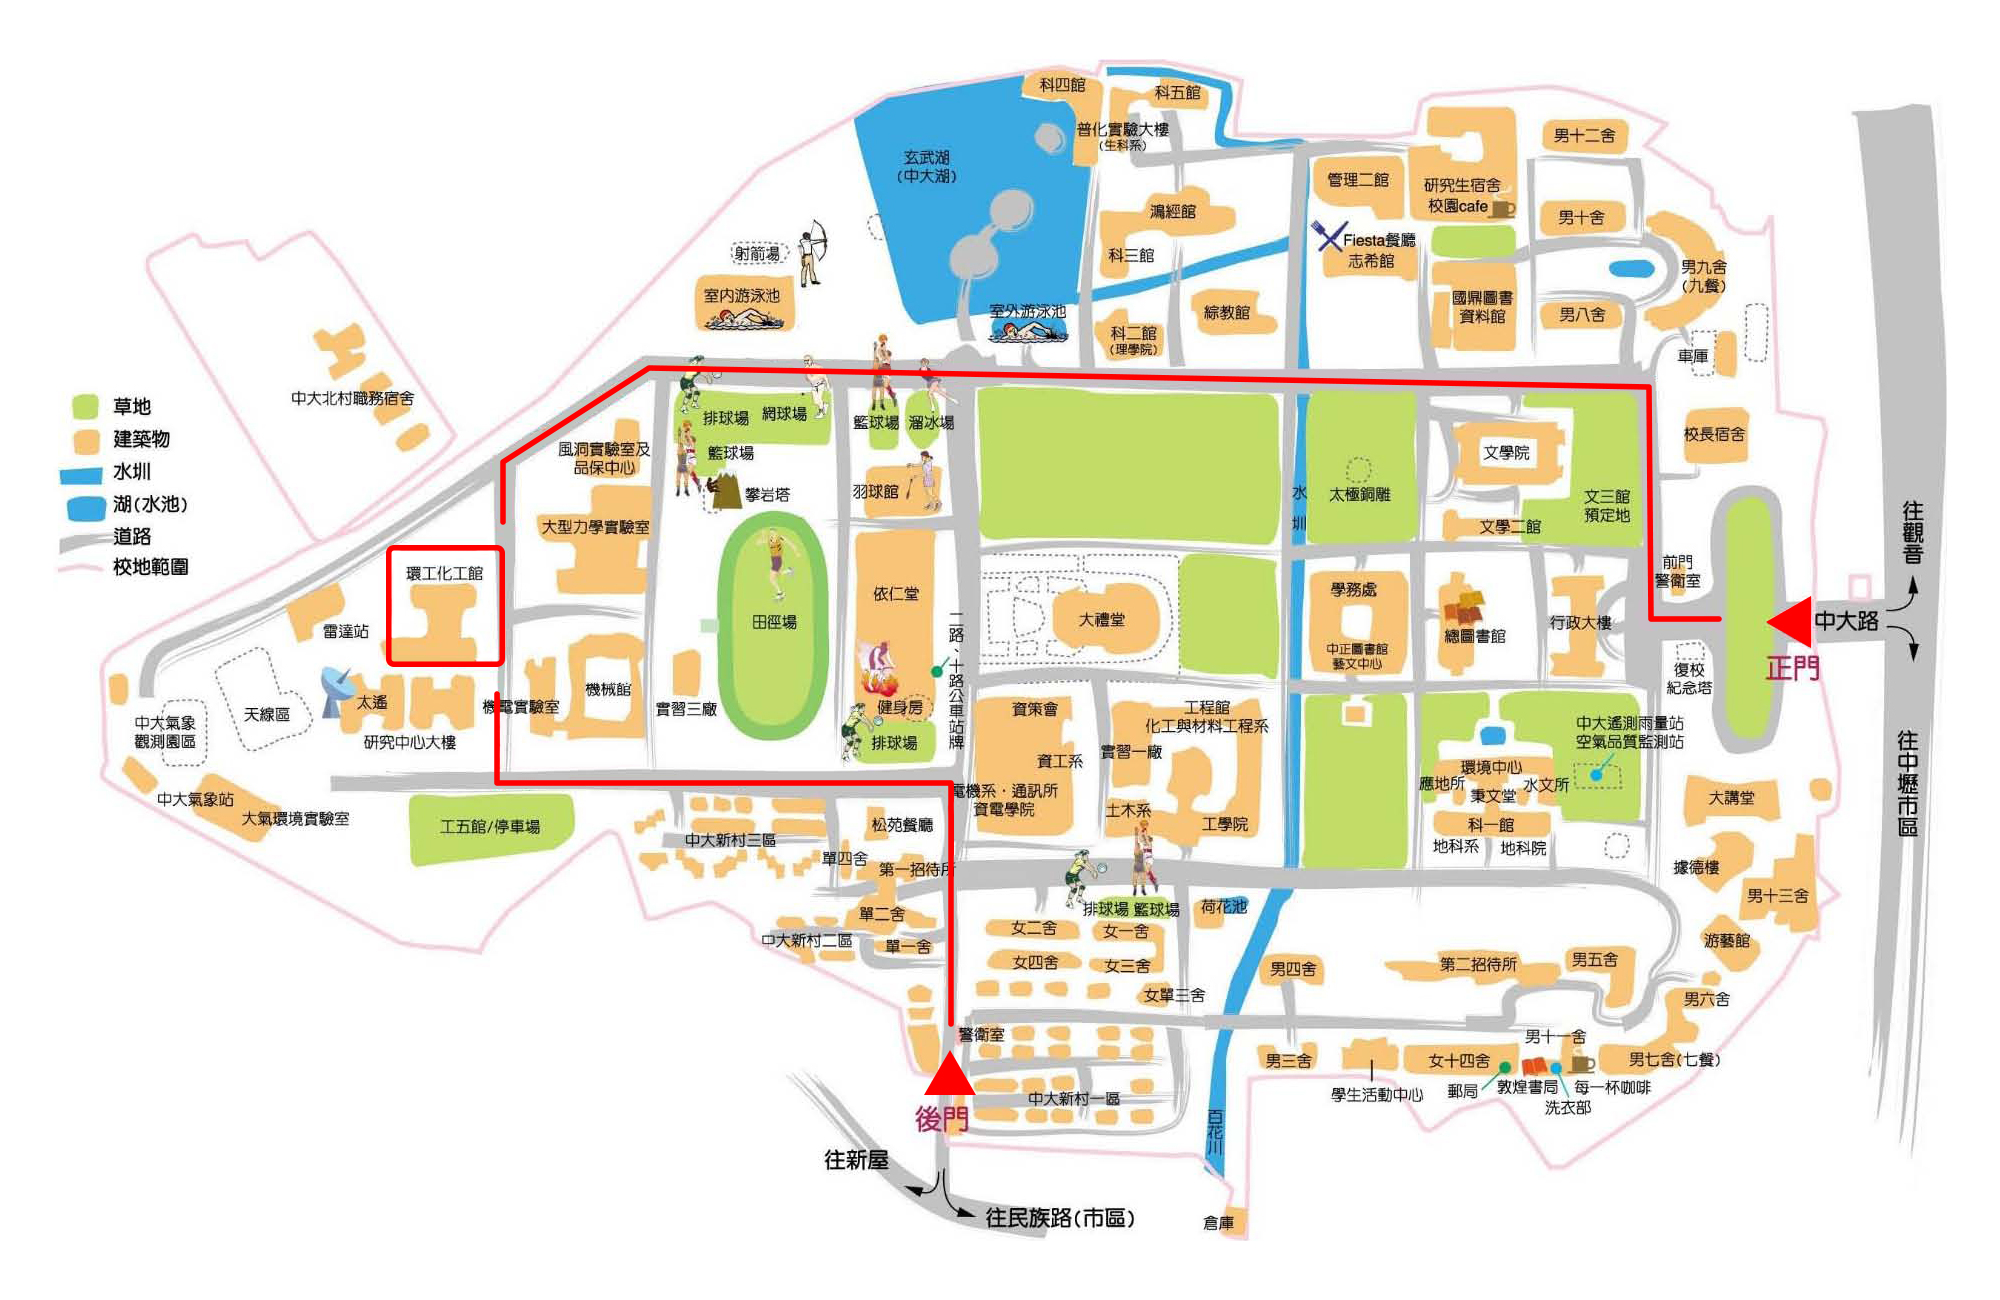 Environmental Engineering Research Institute Location Map picture